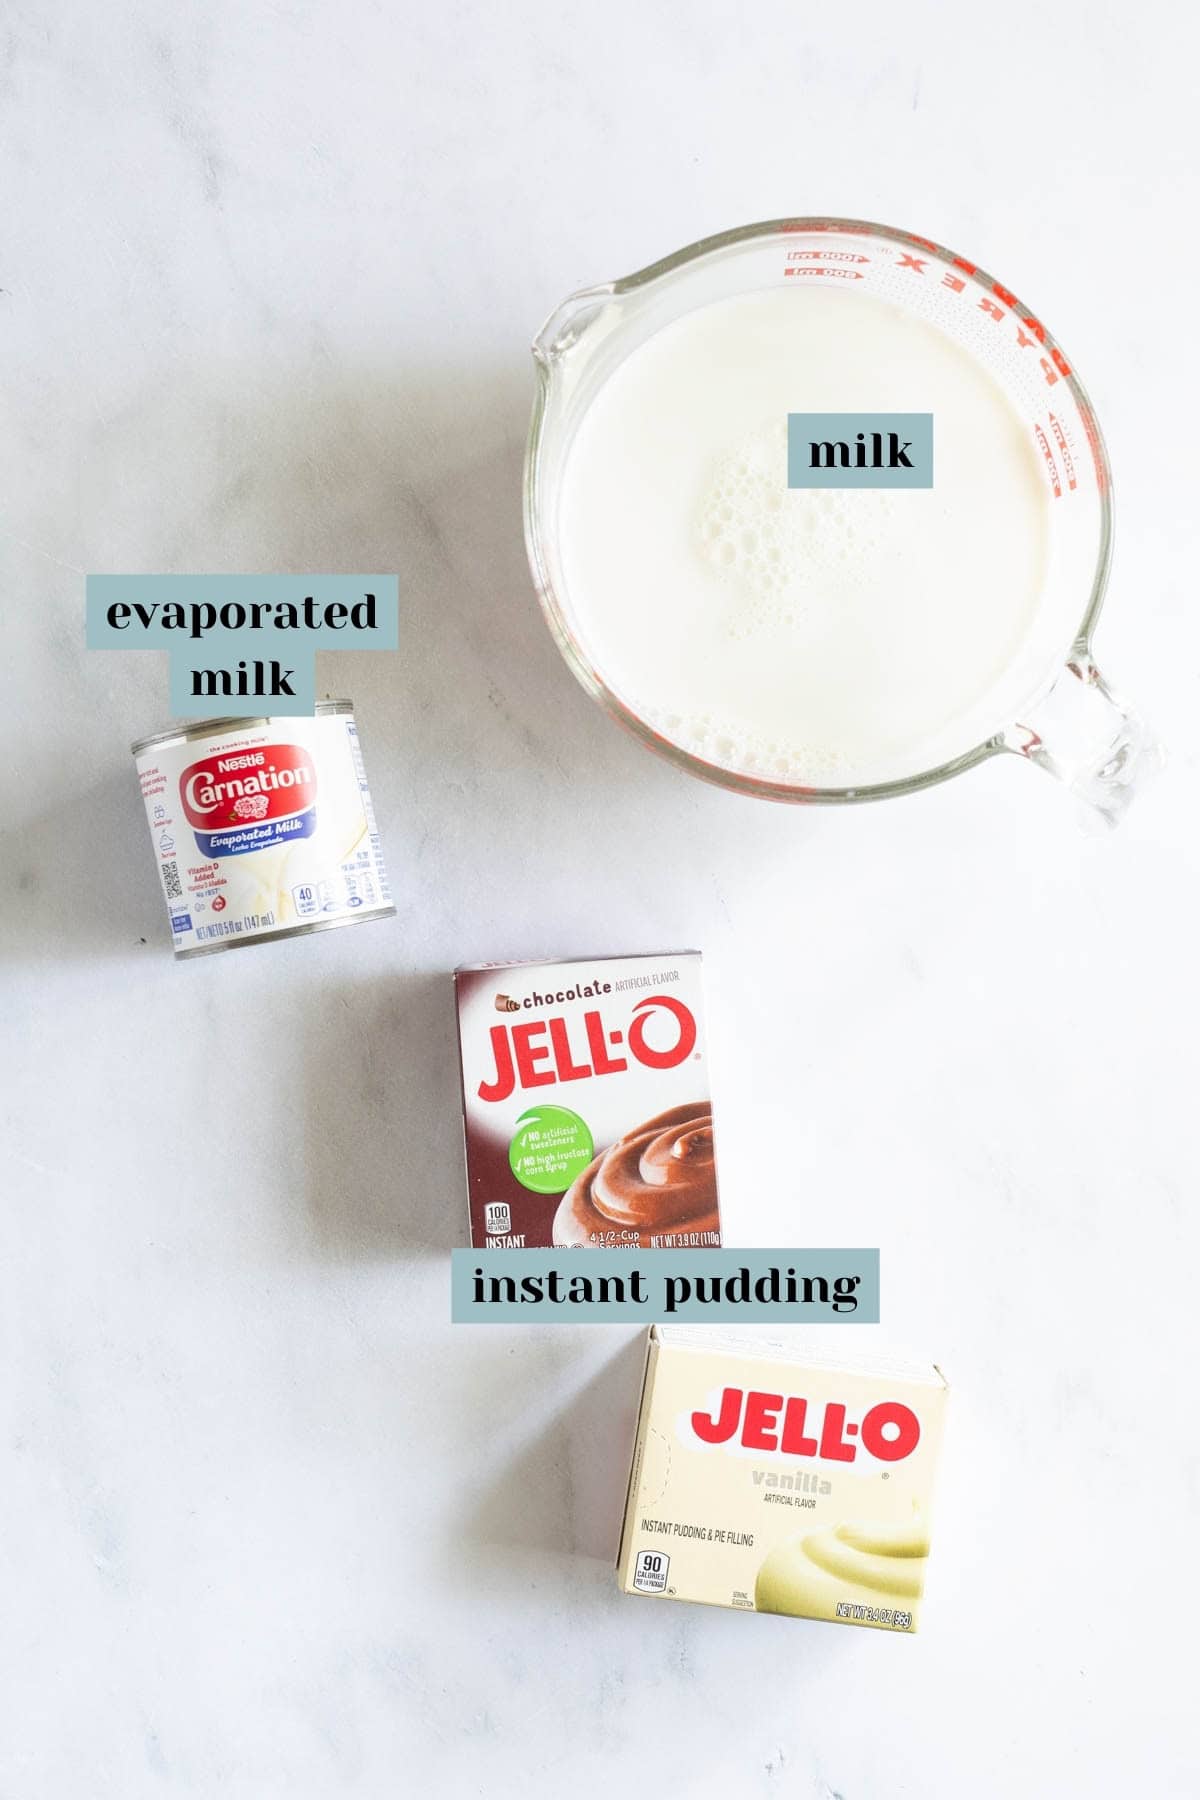 A measuring cup filled with milk next to a can of evaporated milk and two boxes of instant pudding, one chocolate and one vanilla.